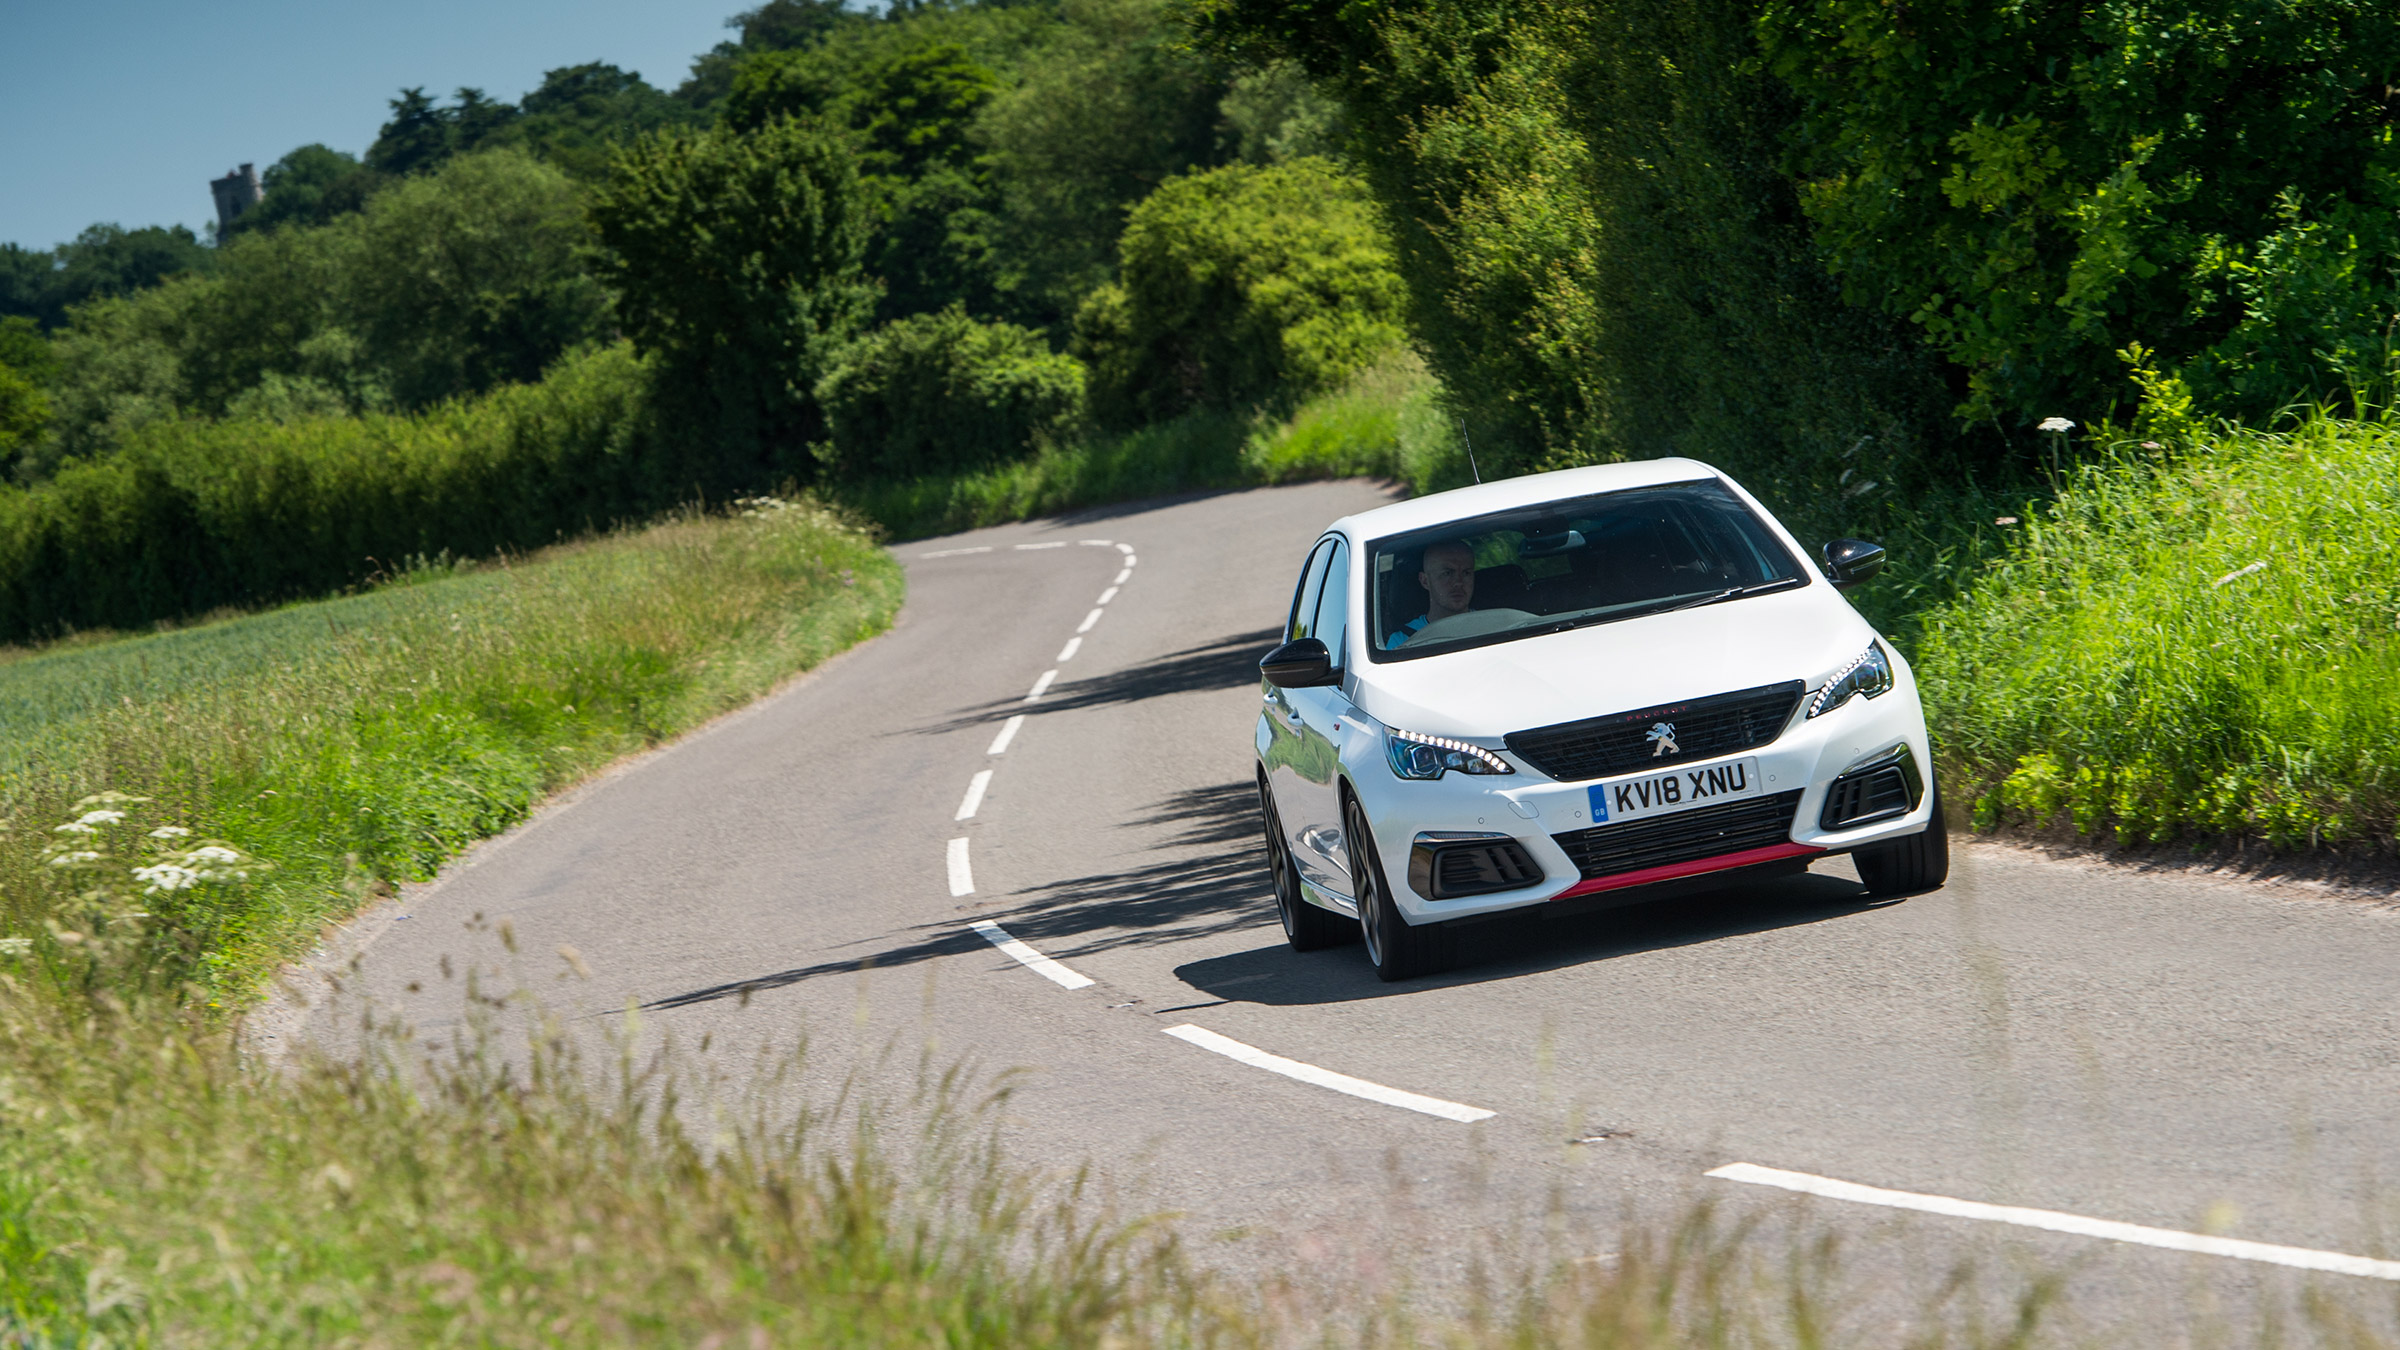 Peugeot 308 GTI Or Sport Engineered Hot Hatch Already Ruled Out